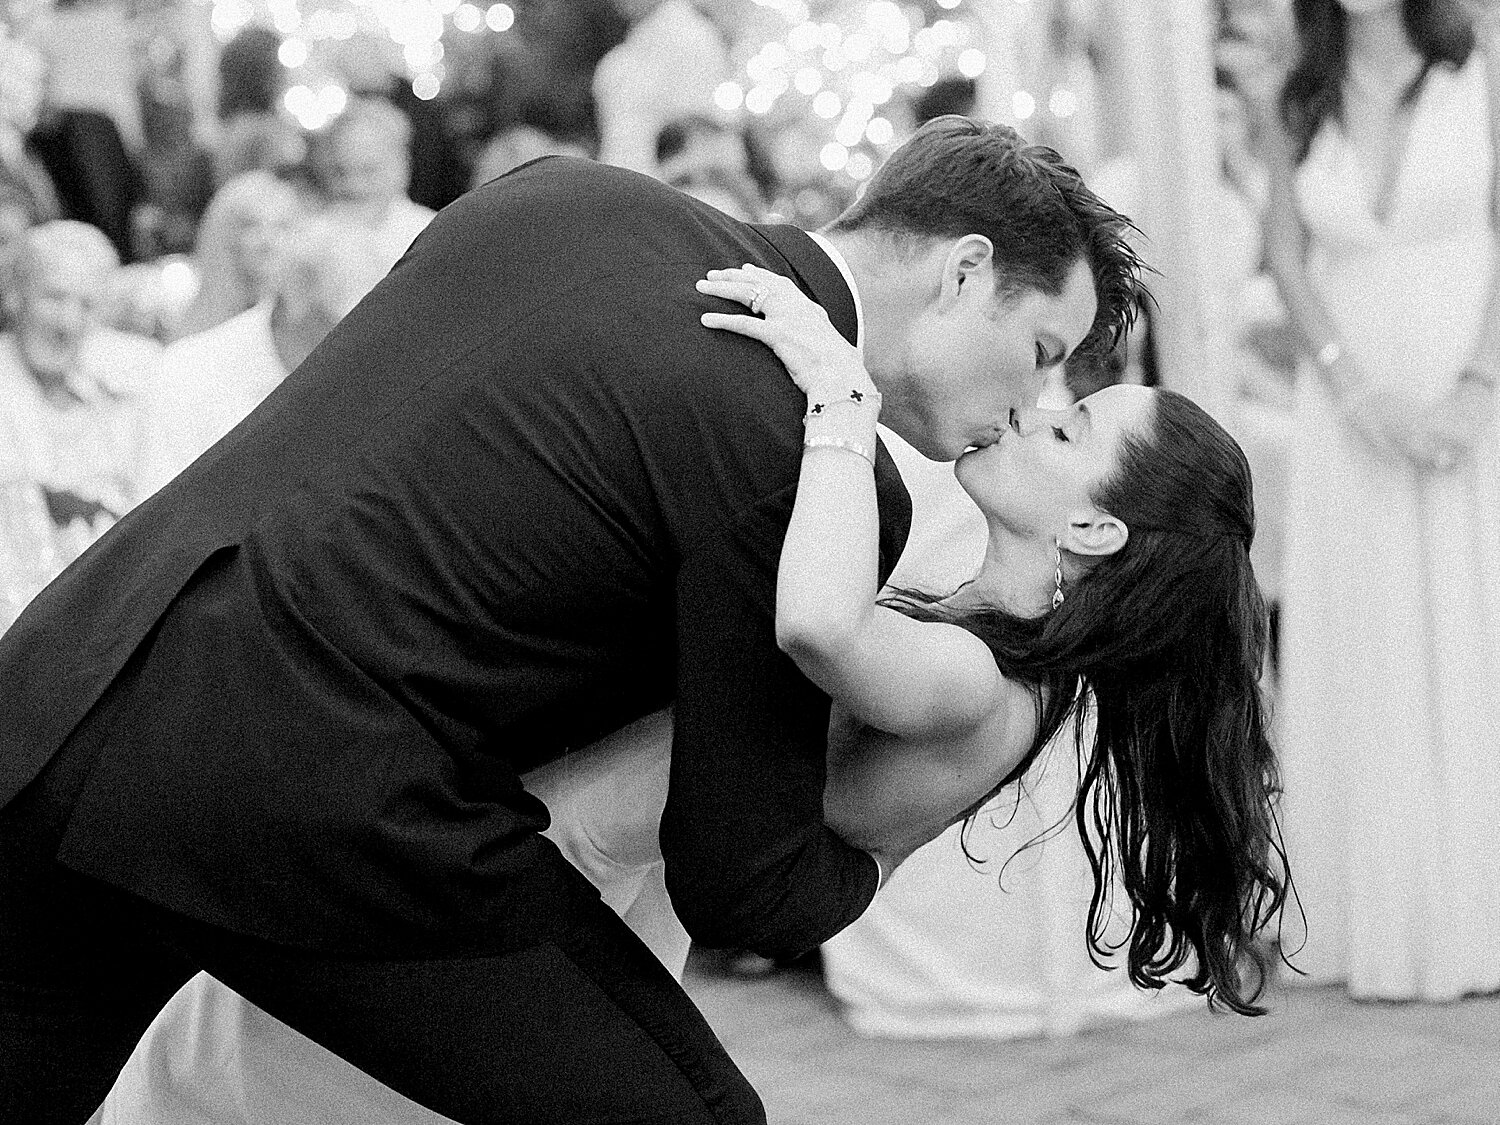 groom dips bride and kisses her during wedding reception | Stylish Private Home Wedding Inspiration | Asher Gardner Photography